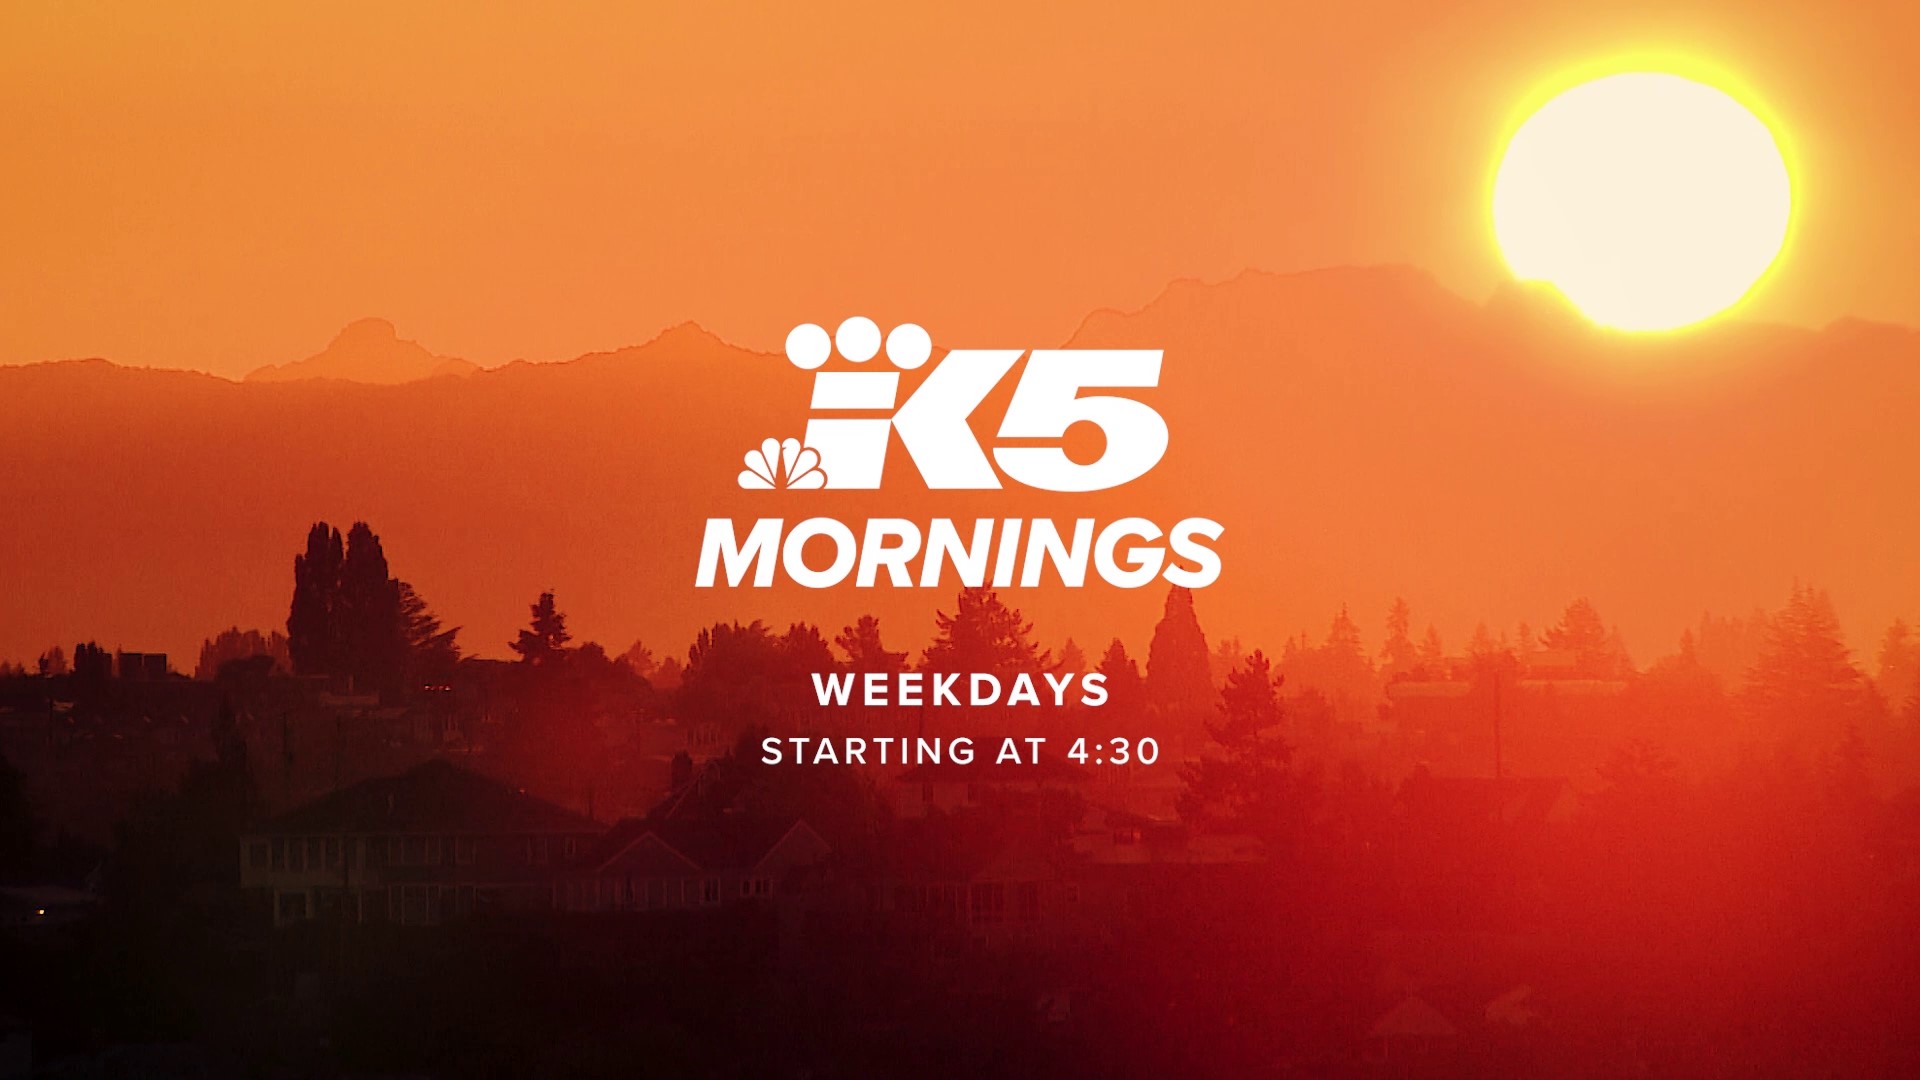 Viewers share why they tune in to KING 5 Mornings and what makes it special.